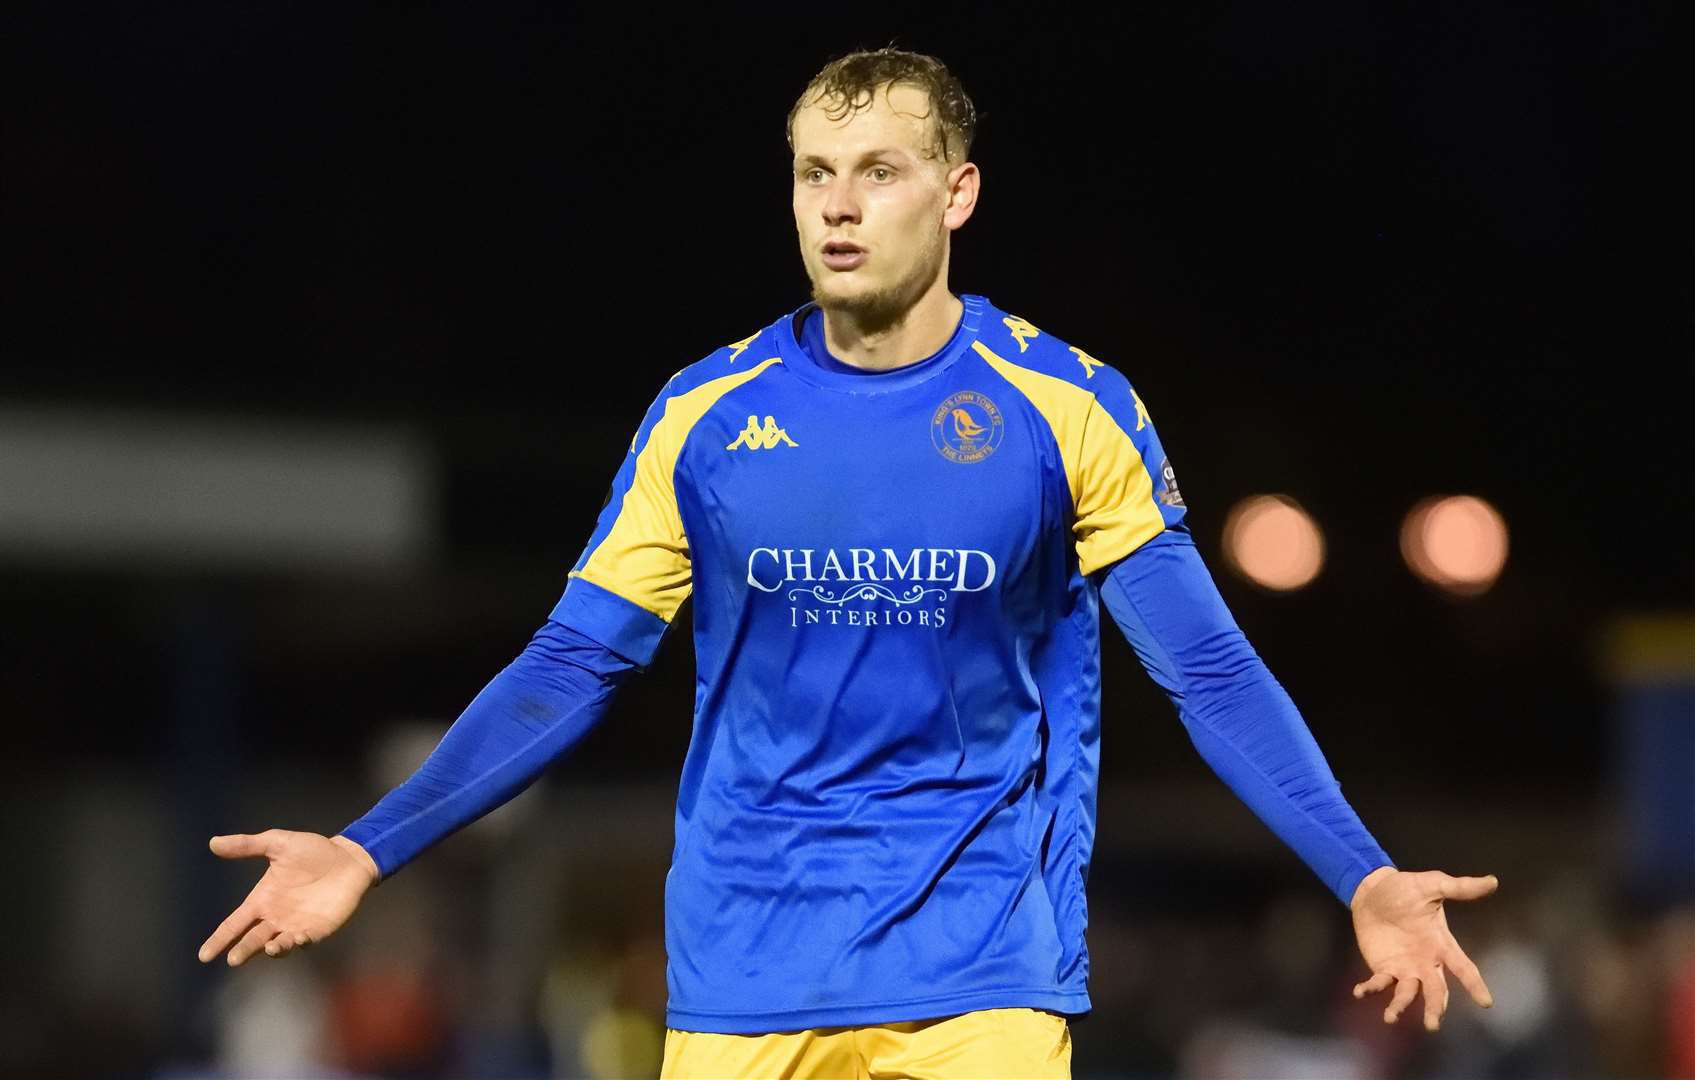 Midfielder Ethan Coleman was previously at Kings Lynn before moving onto Leyton Orient